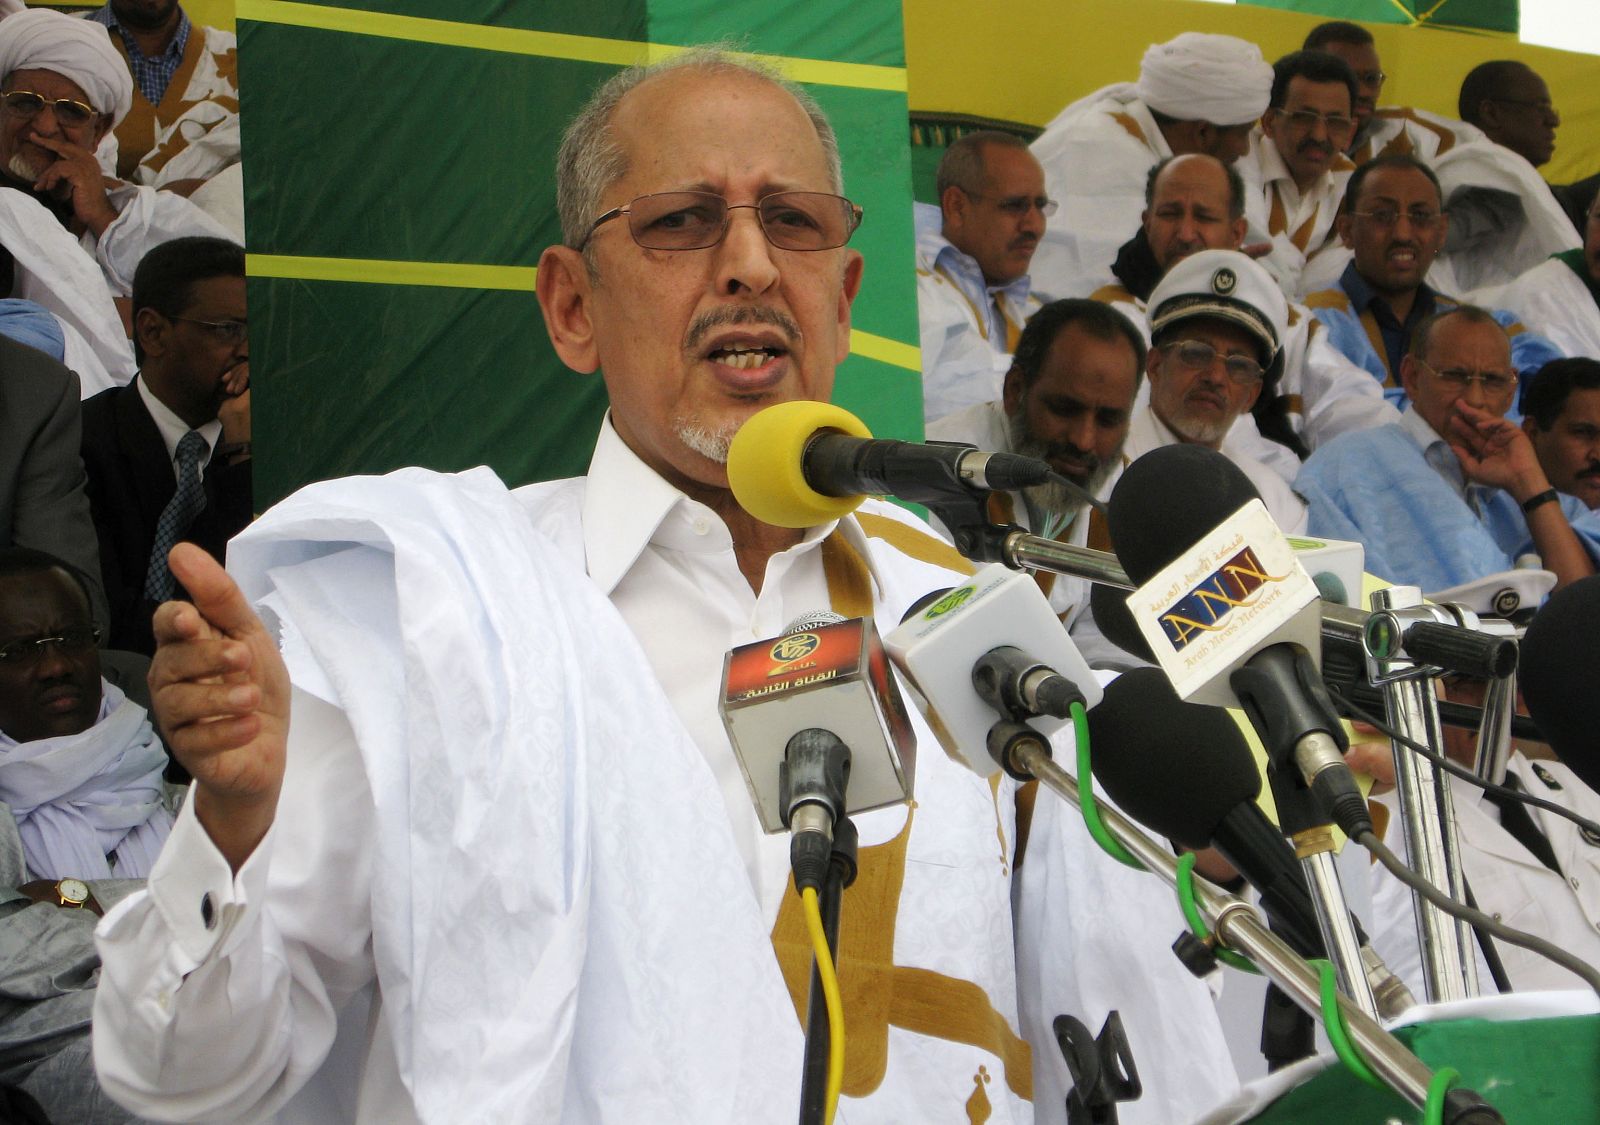 Mauritania's President Sidi Mohamed Ould Cheikh Abdallahi gives a speech in Rosso